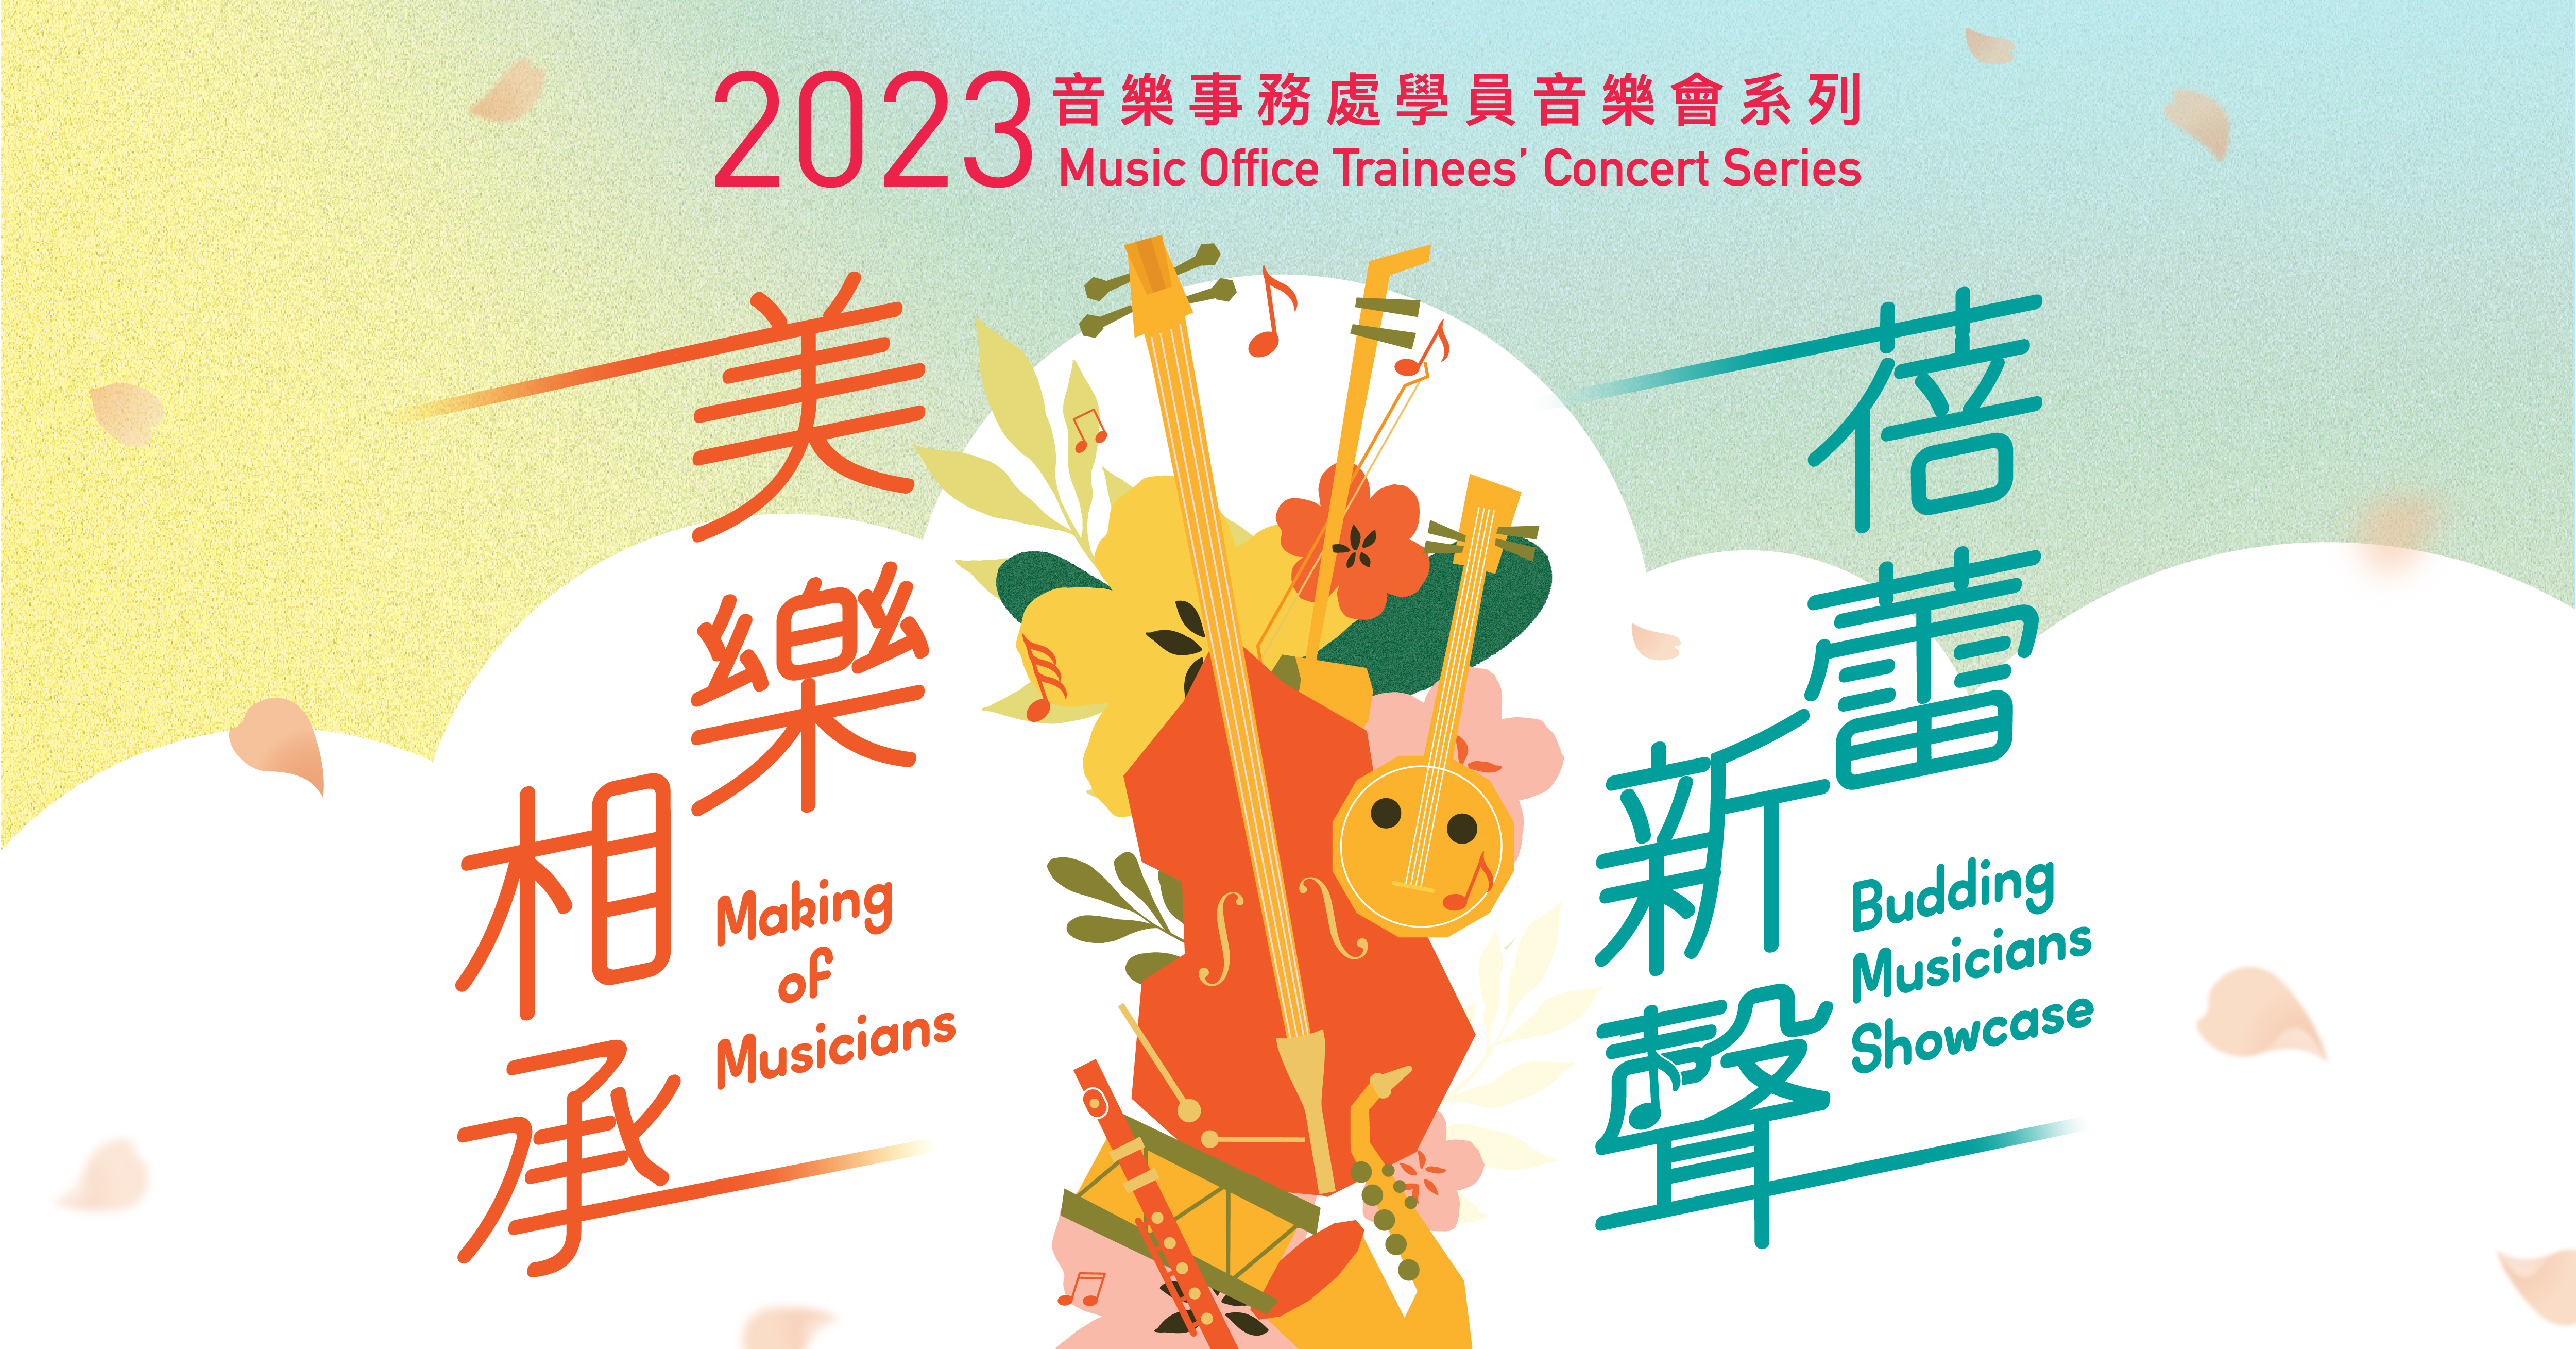 2023 “Making of Musicians” and “Budding Musicians Showcase” Music Office Trainees’ Concerts